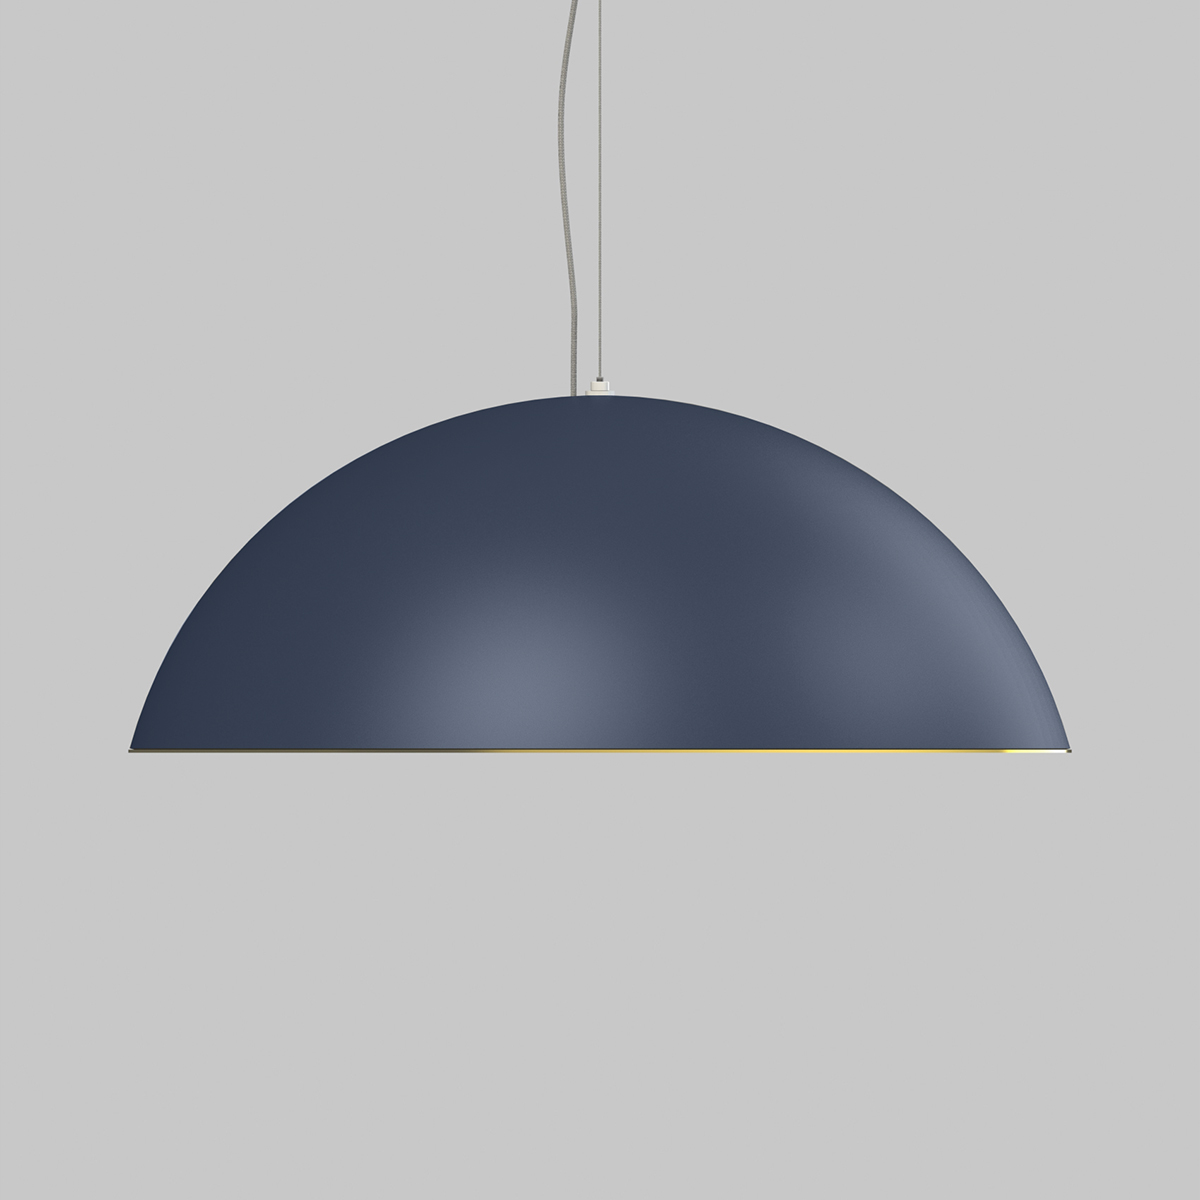 Dome pendant light with LED lighting